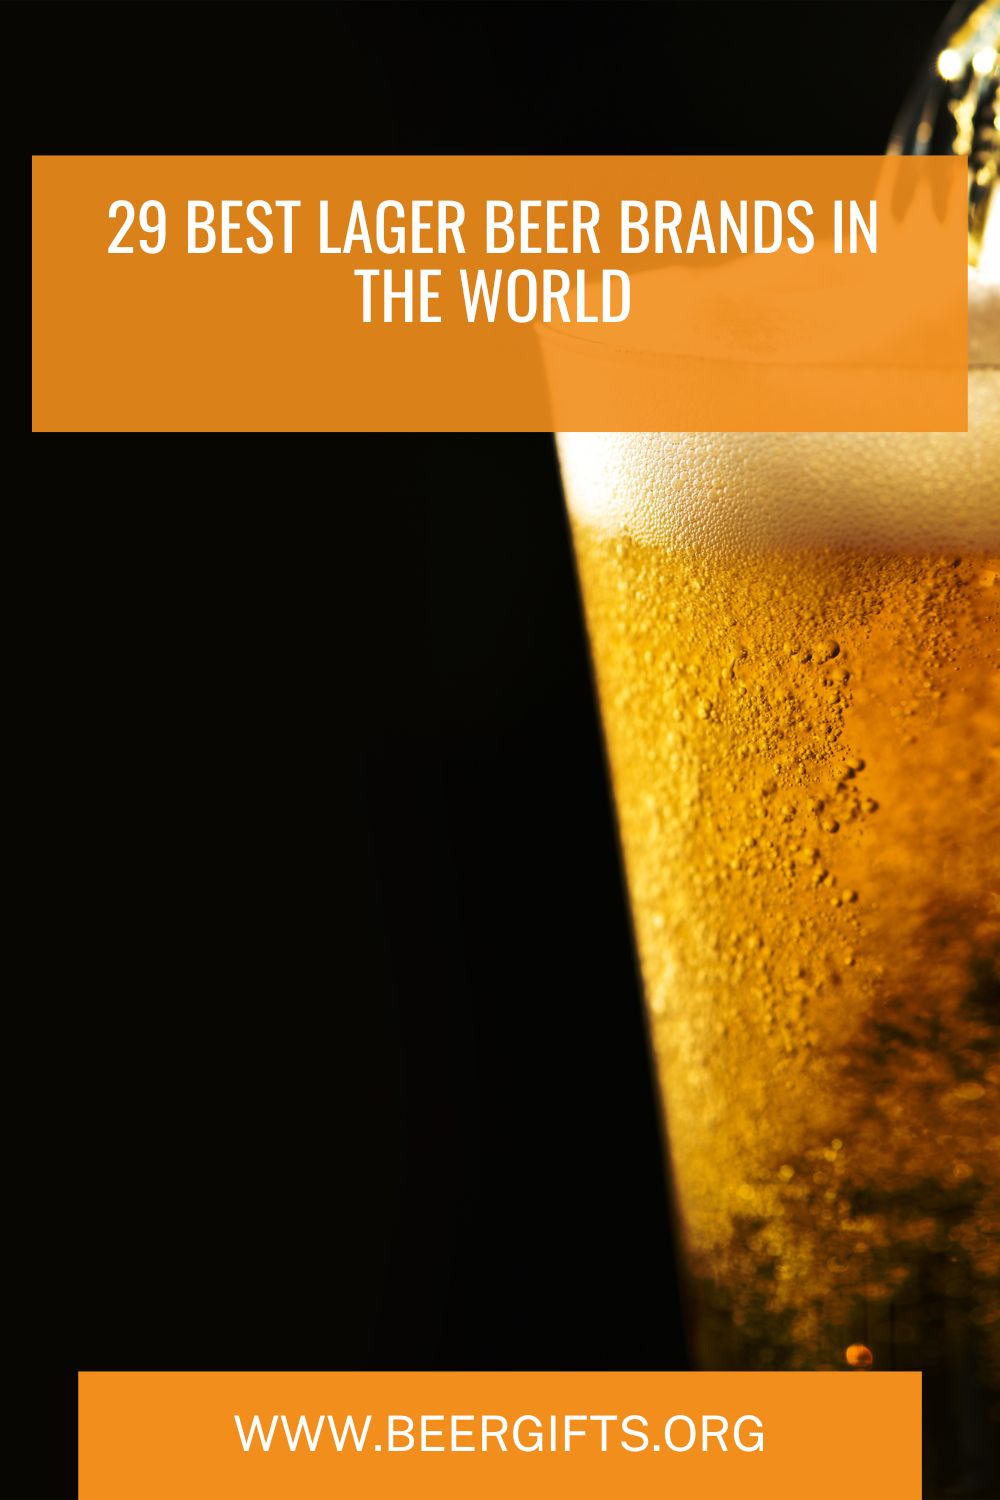 29 Best Lager Beer Brands In the World33